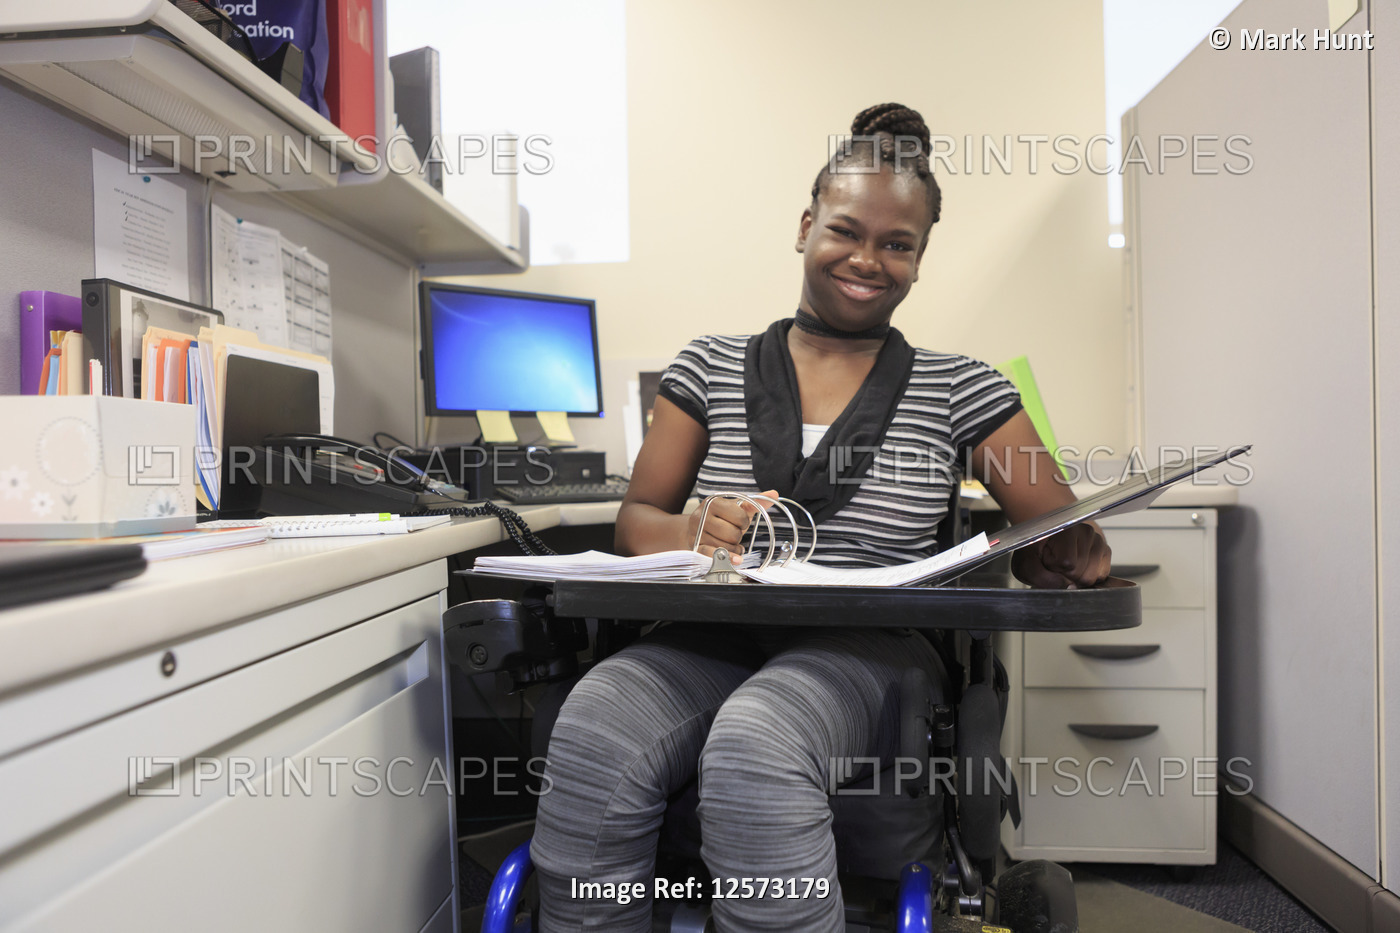 Teen with Cerebral Palsy working in an office